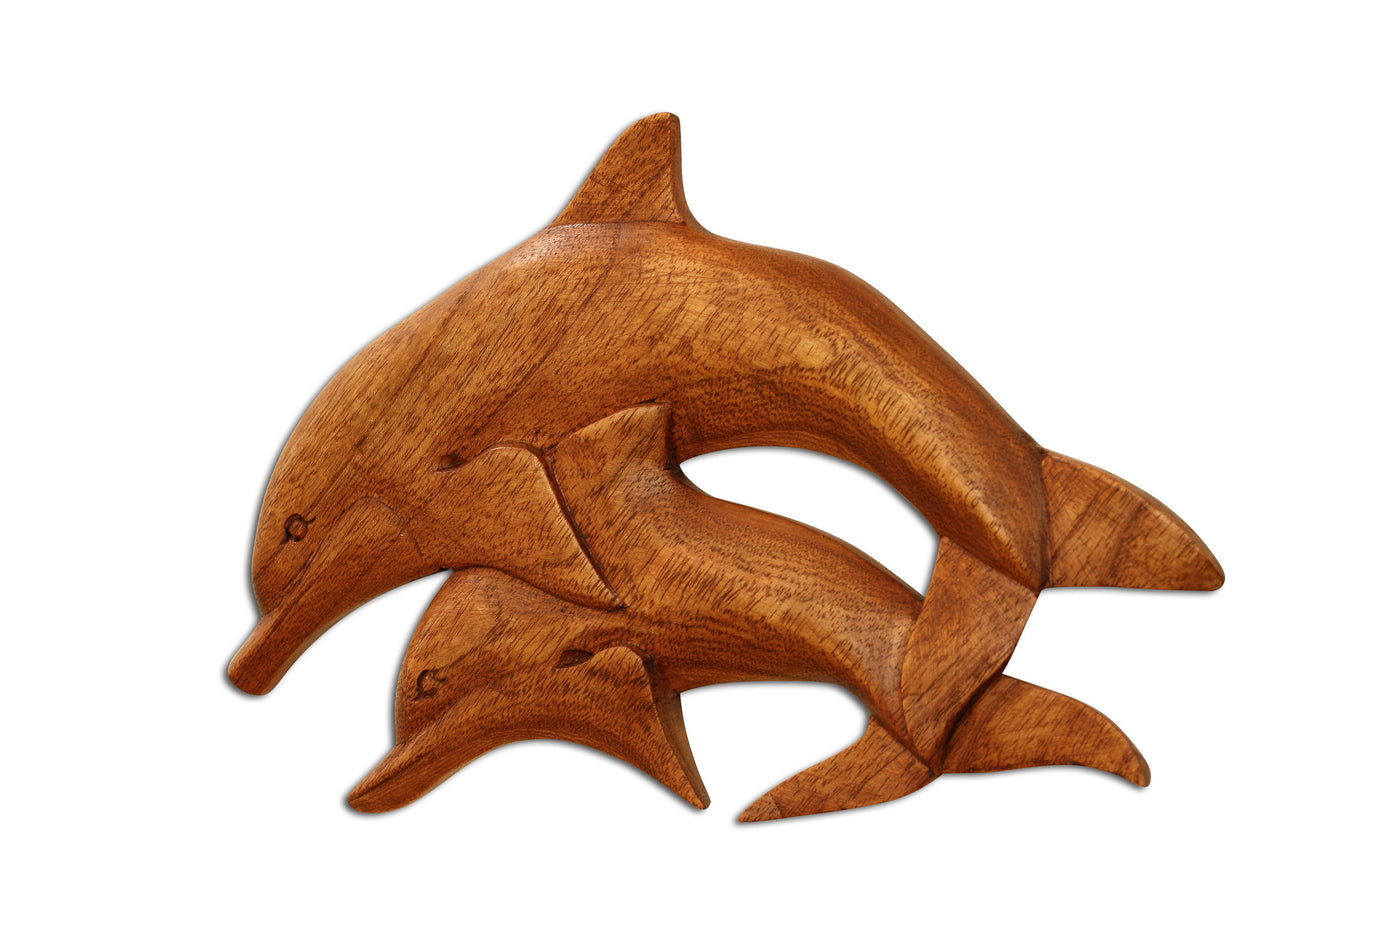 Wooden 2 Dolphins Wall Decor Plaque Hanging Sculpture Hand Carved Accent Fish Handcrafted Handmade Seaside Tropical Nautical Ocean Coastal Wood Home